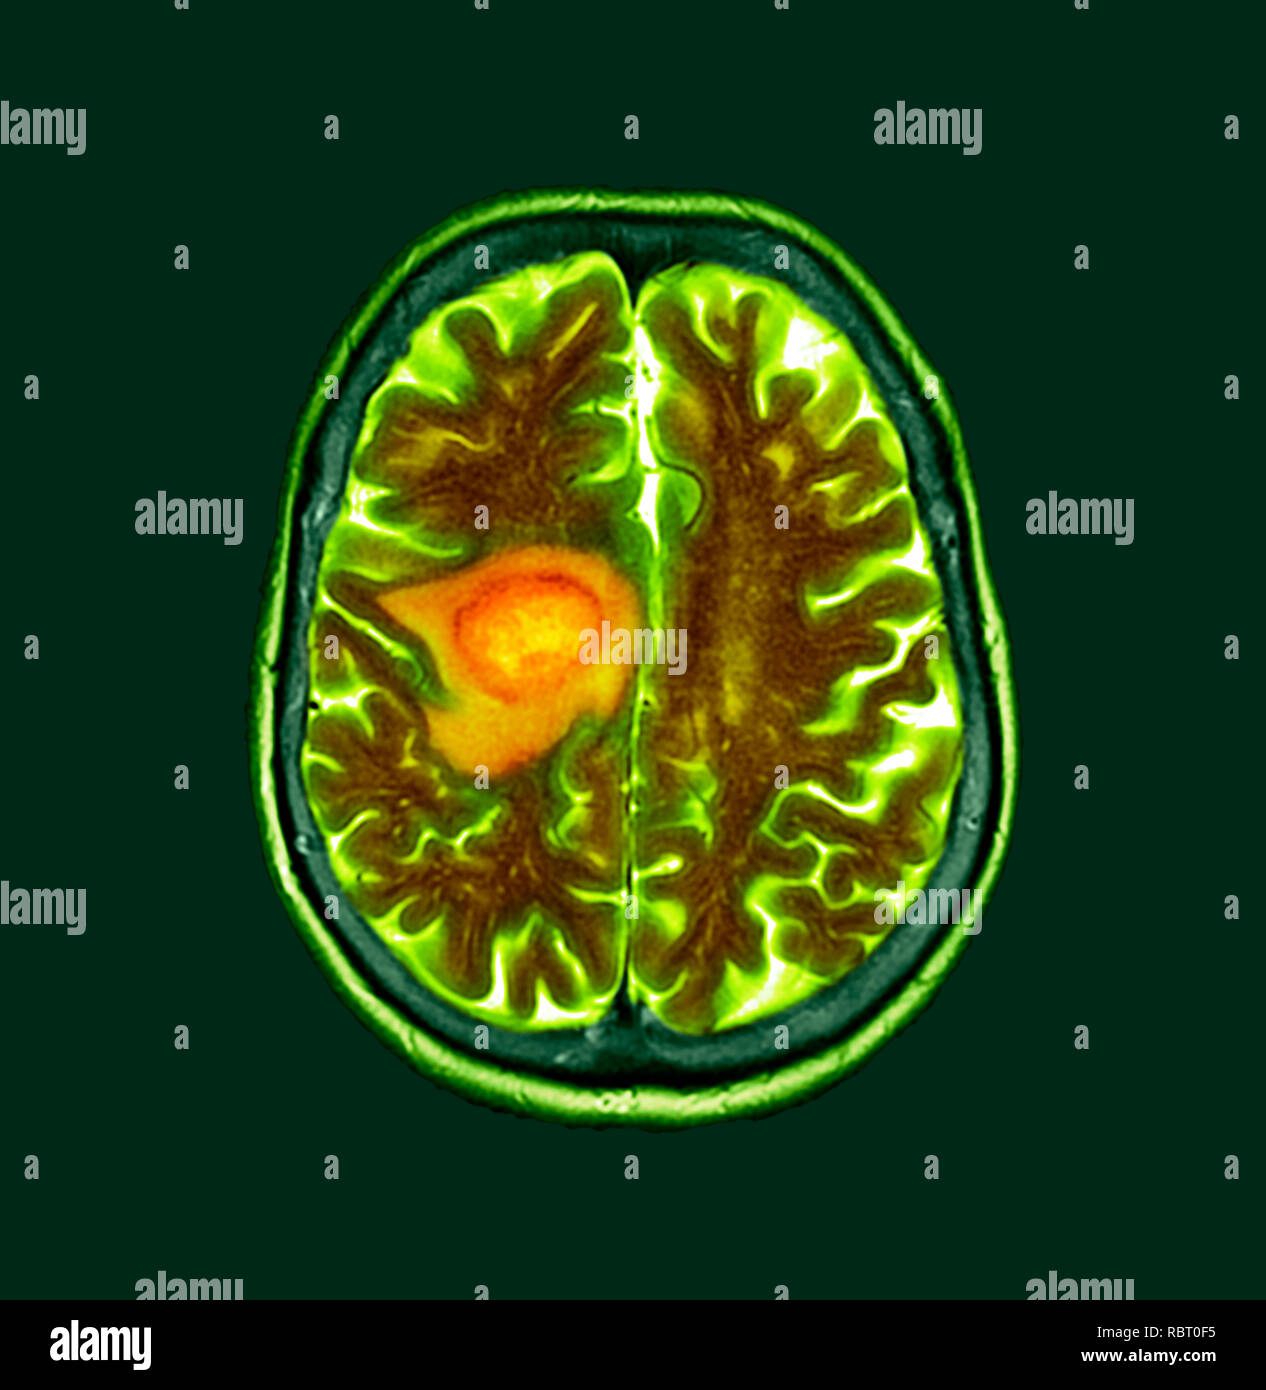 Glioblastoma brain cancer. Coloured computed tomography (CT) scan of a section through the brain of an 84-year-old female patient with glioblastoma (dark, left). Glioblastoma is the most aggressive form of brain cancer. Treatment involves surgery, after which chemotherapy and radiation therapy are used. However, the cancer usually reoccurs despite treatment and the most common length of survival after diagnosis is 12-15 months. Without treatment, survival is typically 3 months. Stock Photo